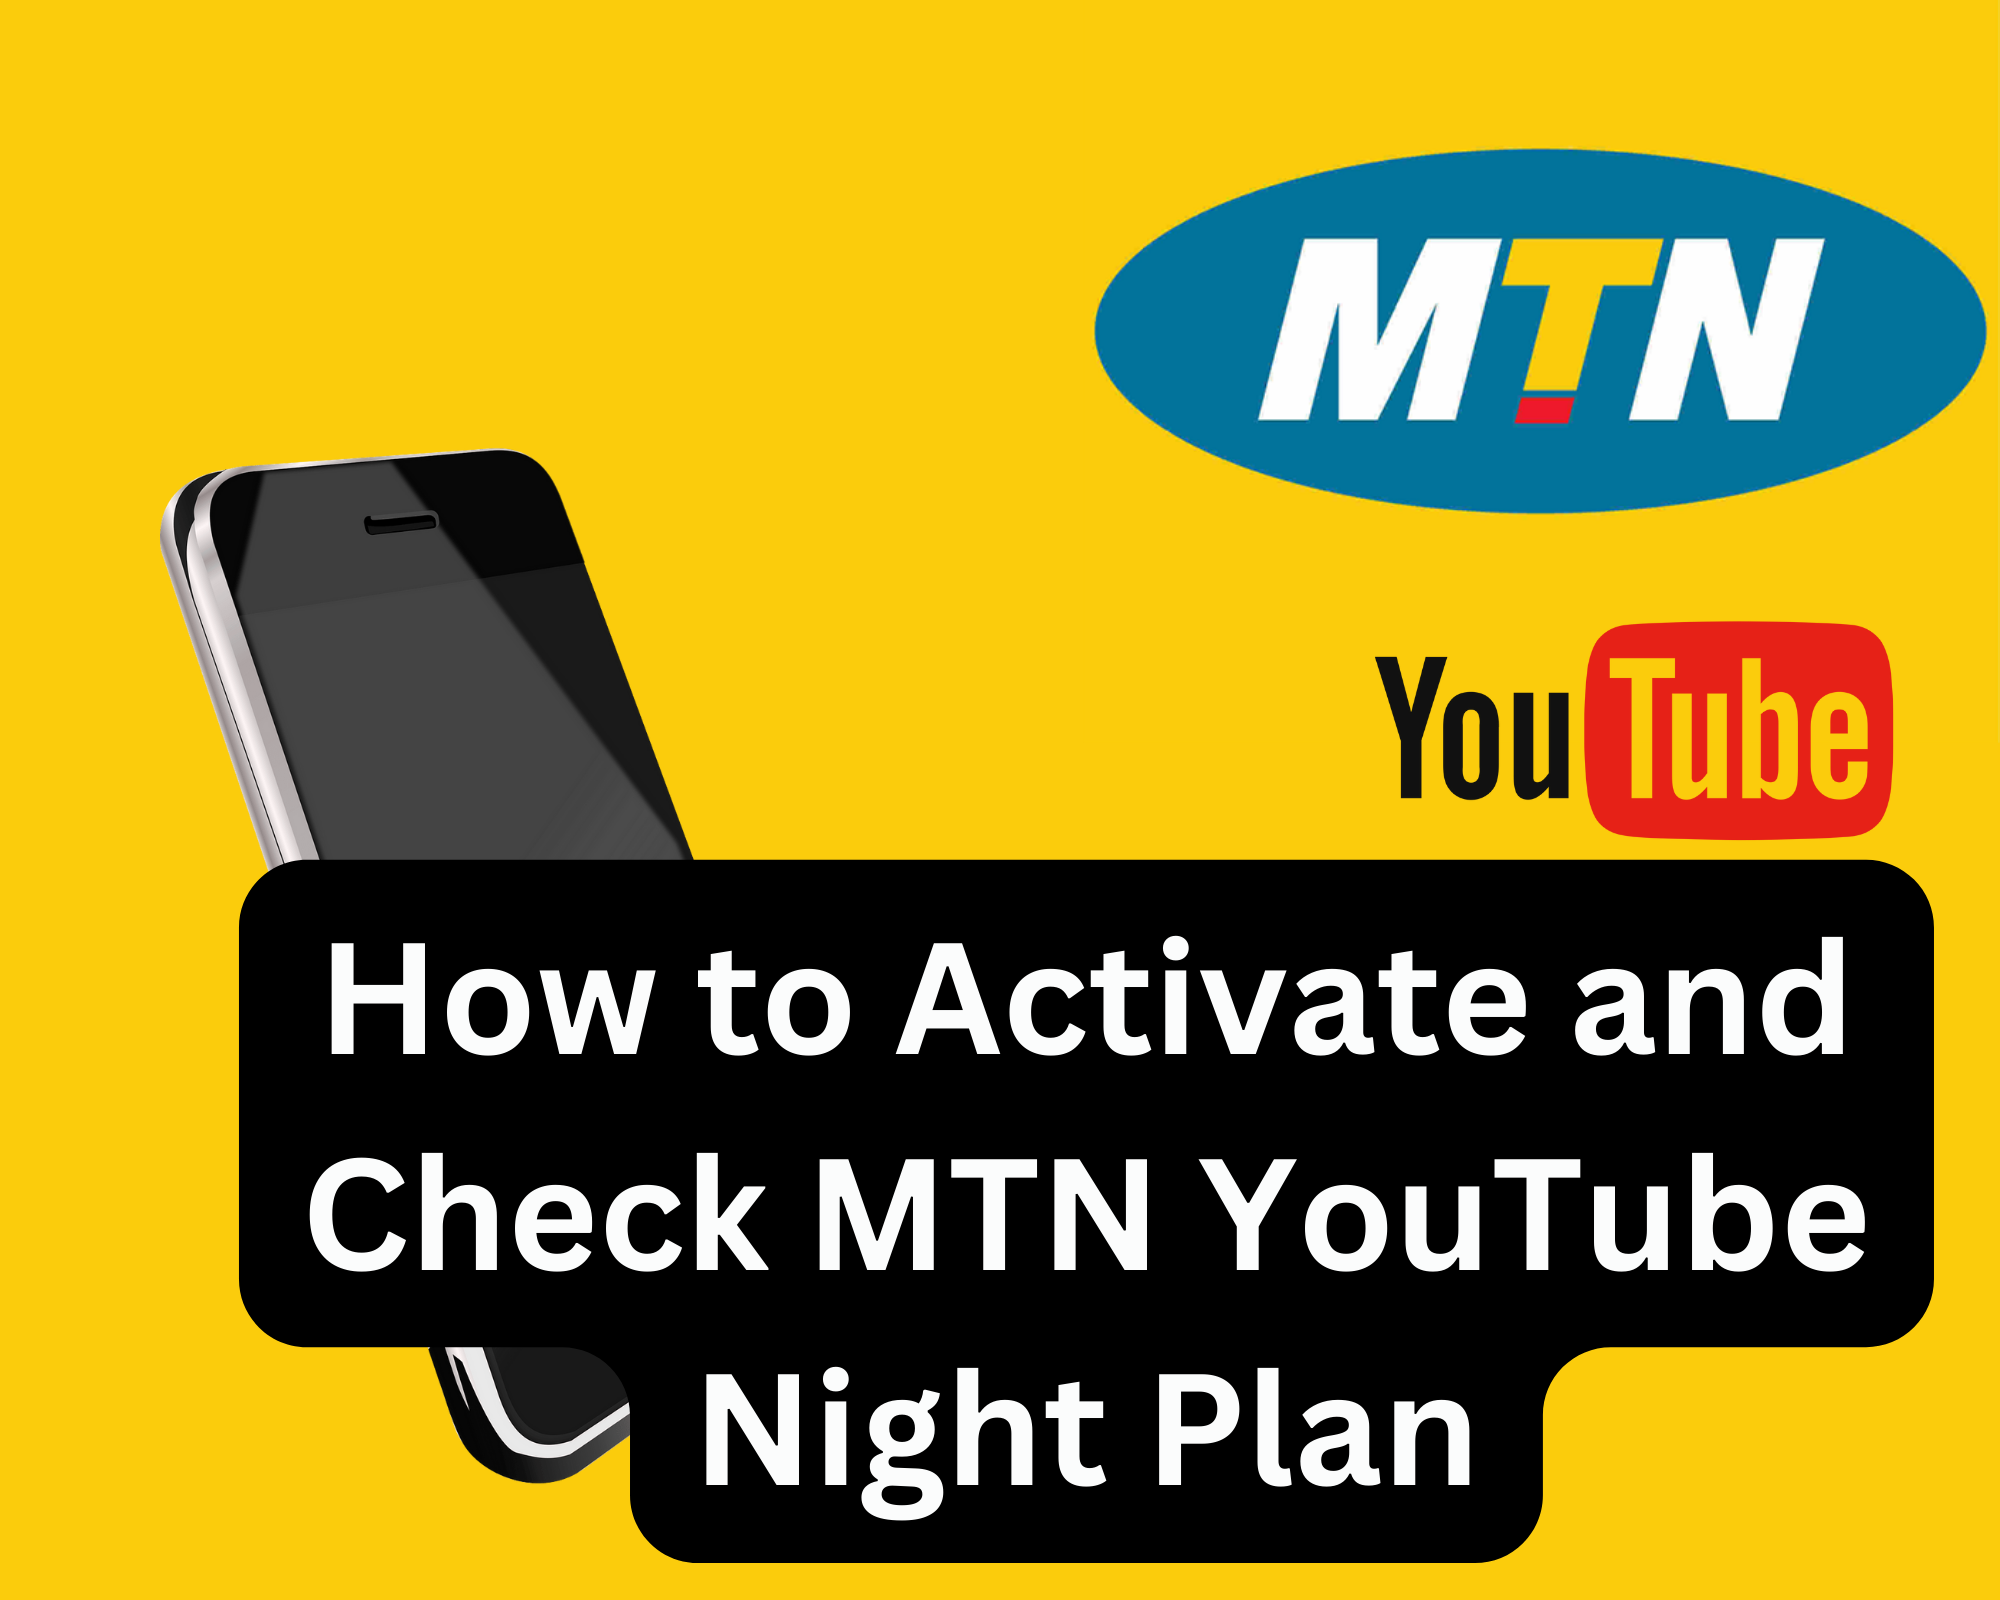 How to Activate and Check MTN YouTube Night Plan